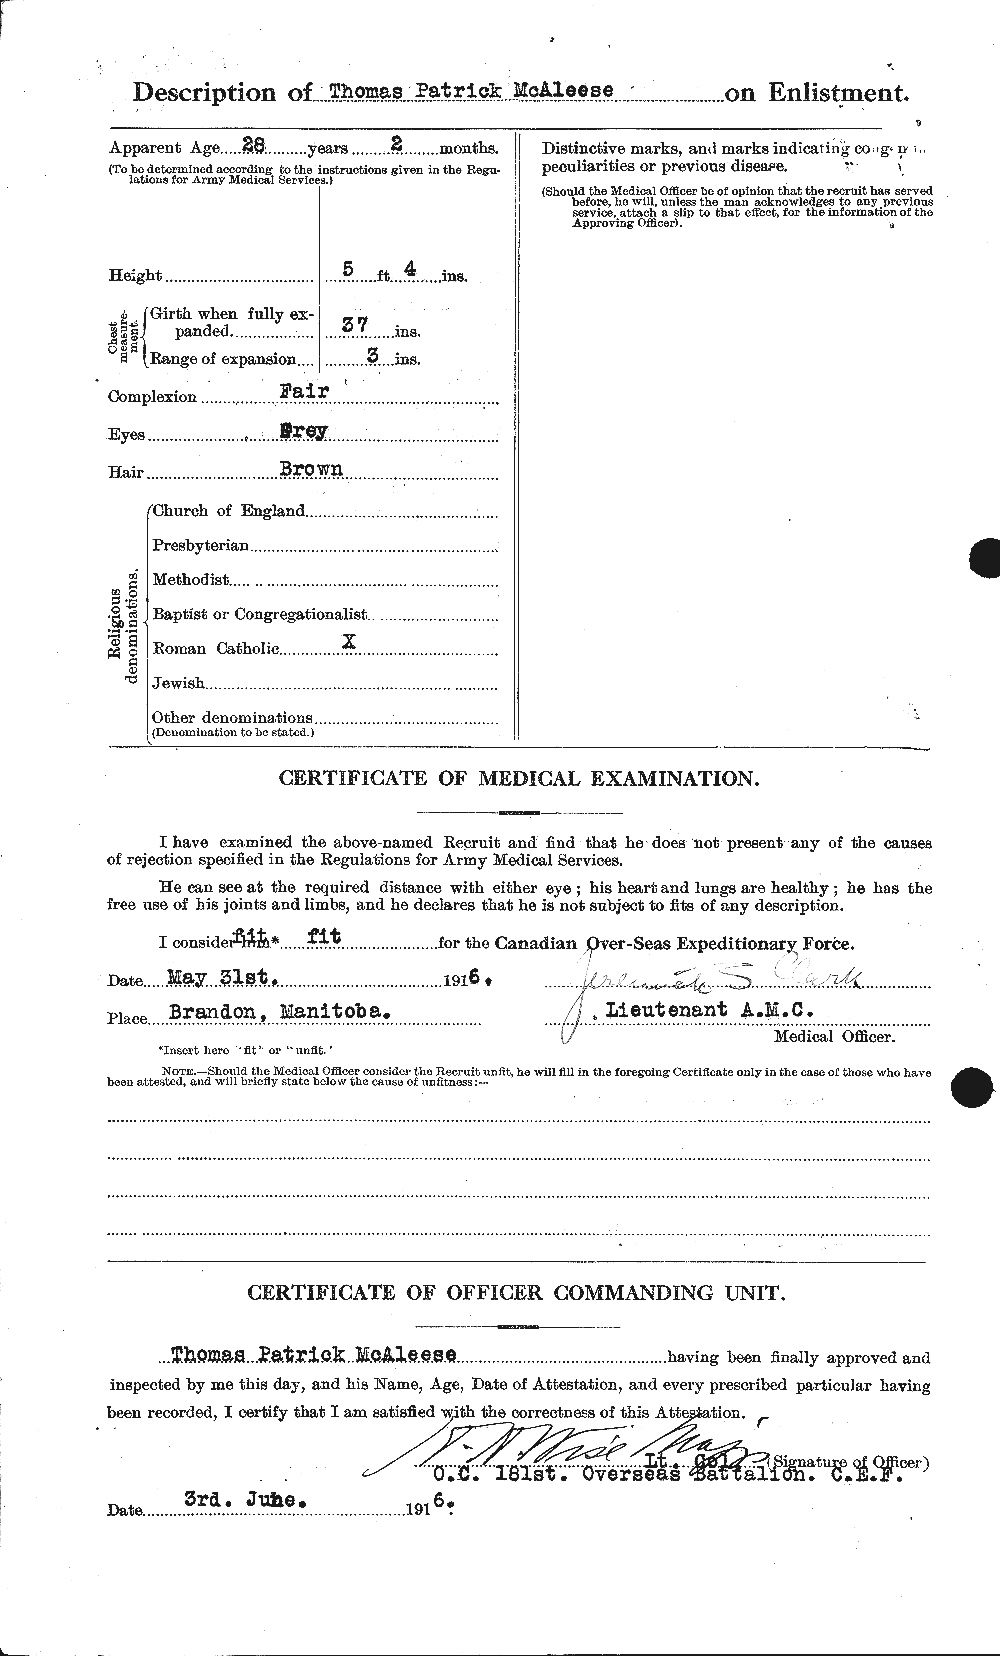 Personnel Records of the First World War - CEF 513096b